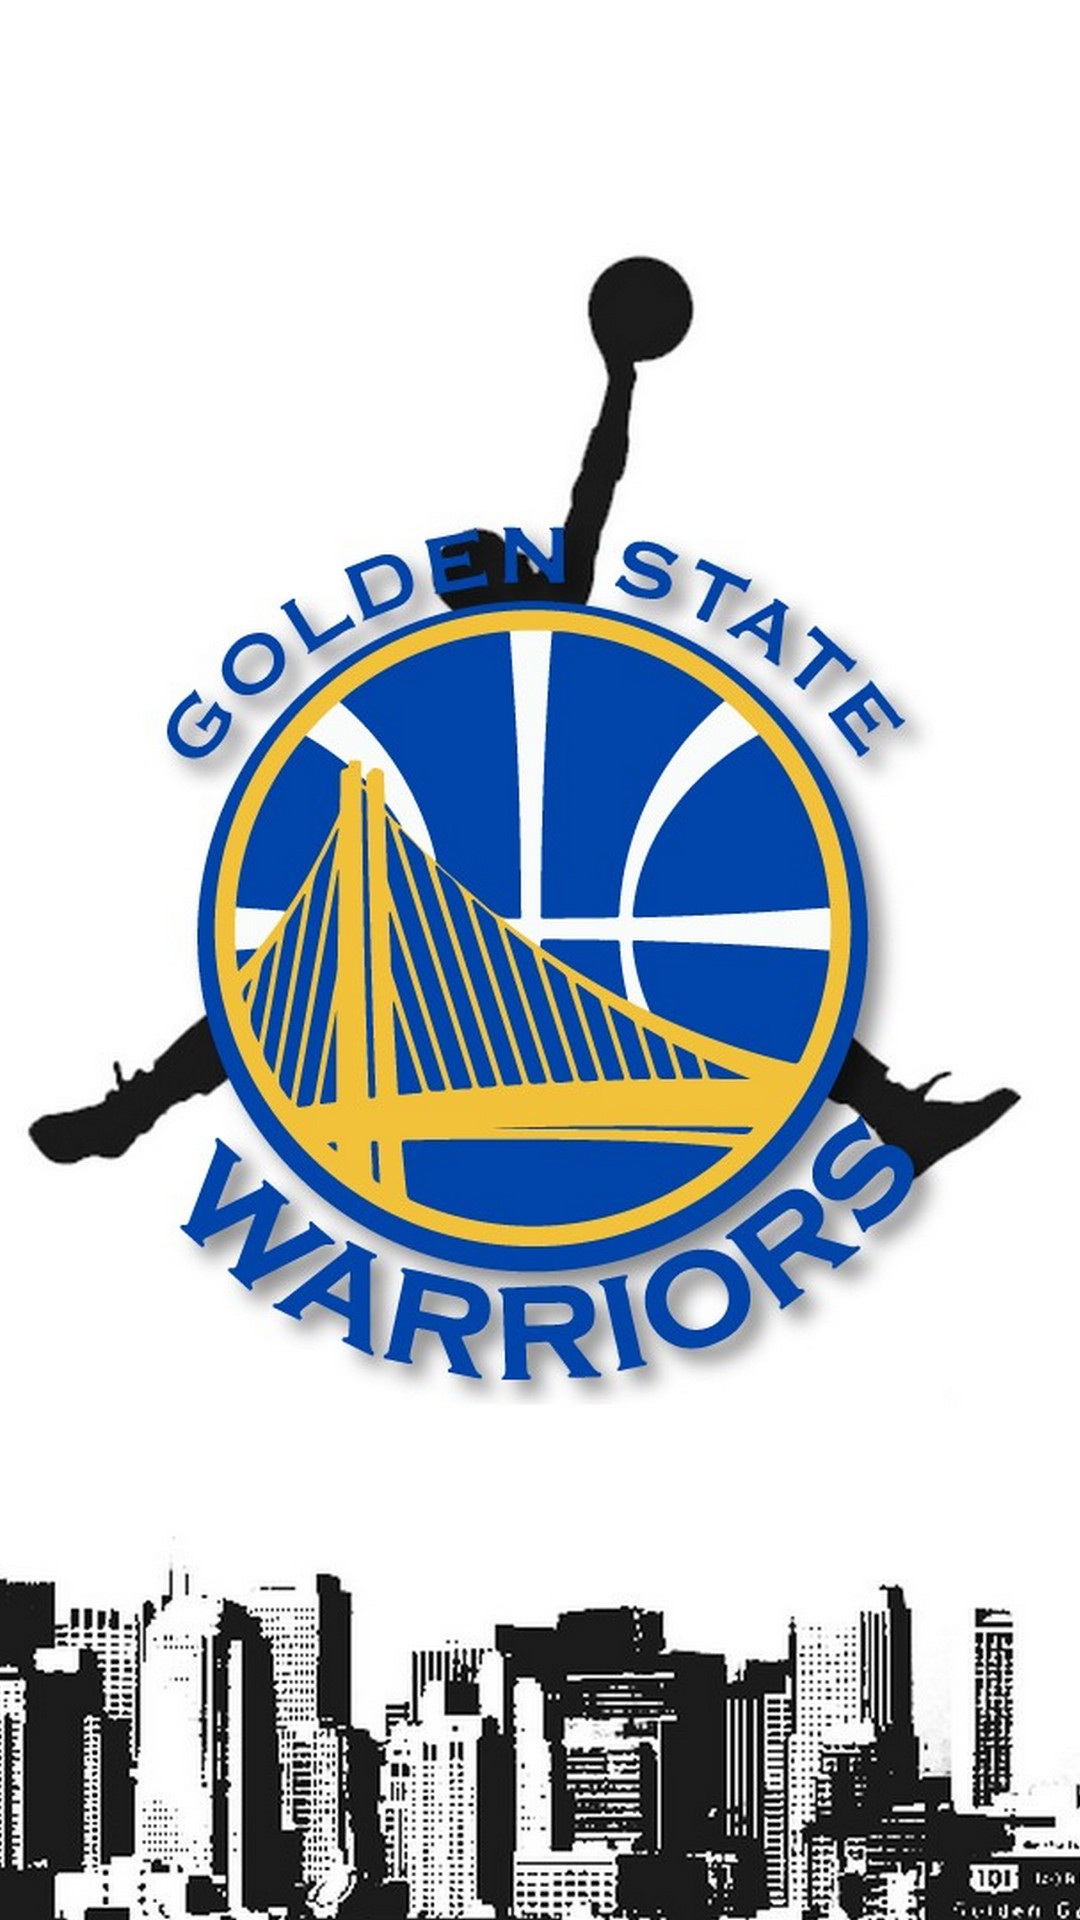 Wallpapers Phone Golden State Warriors with resolution 1080X1920 pixel. You can make this wallpaper for your Android backgrounds, Tablet, Smartphones Screensavers and Mobile Phone Lock Screen